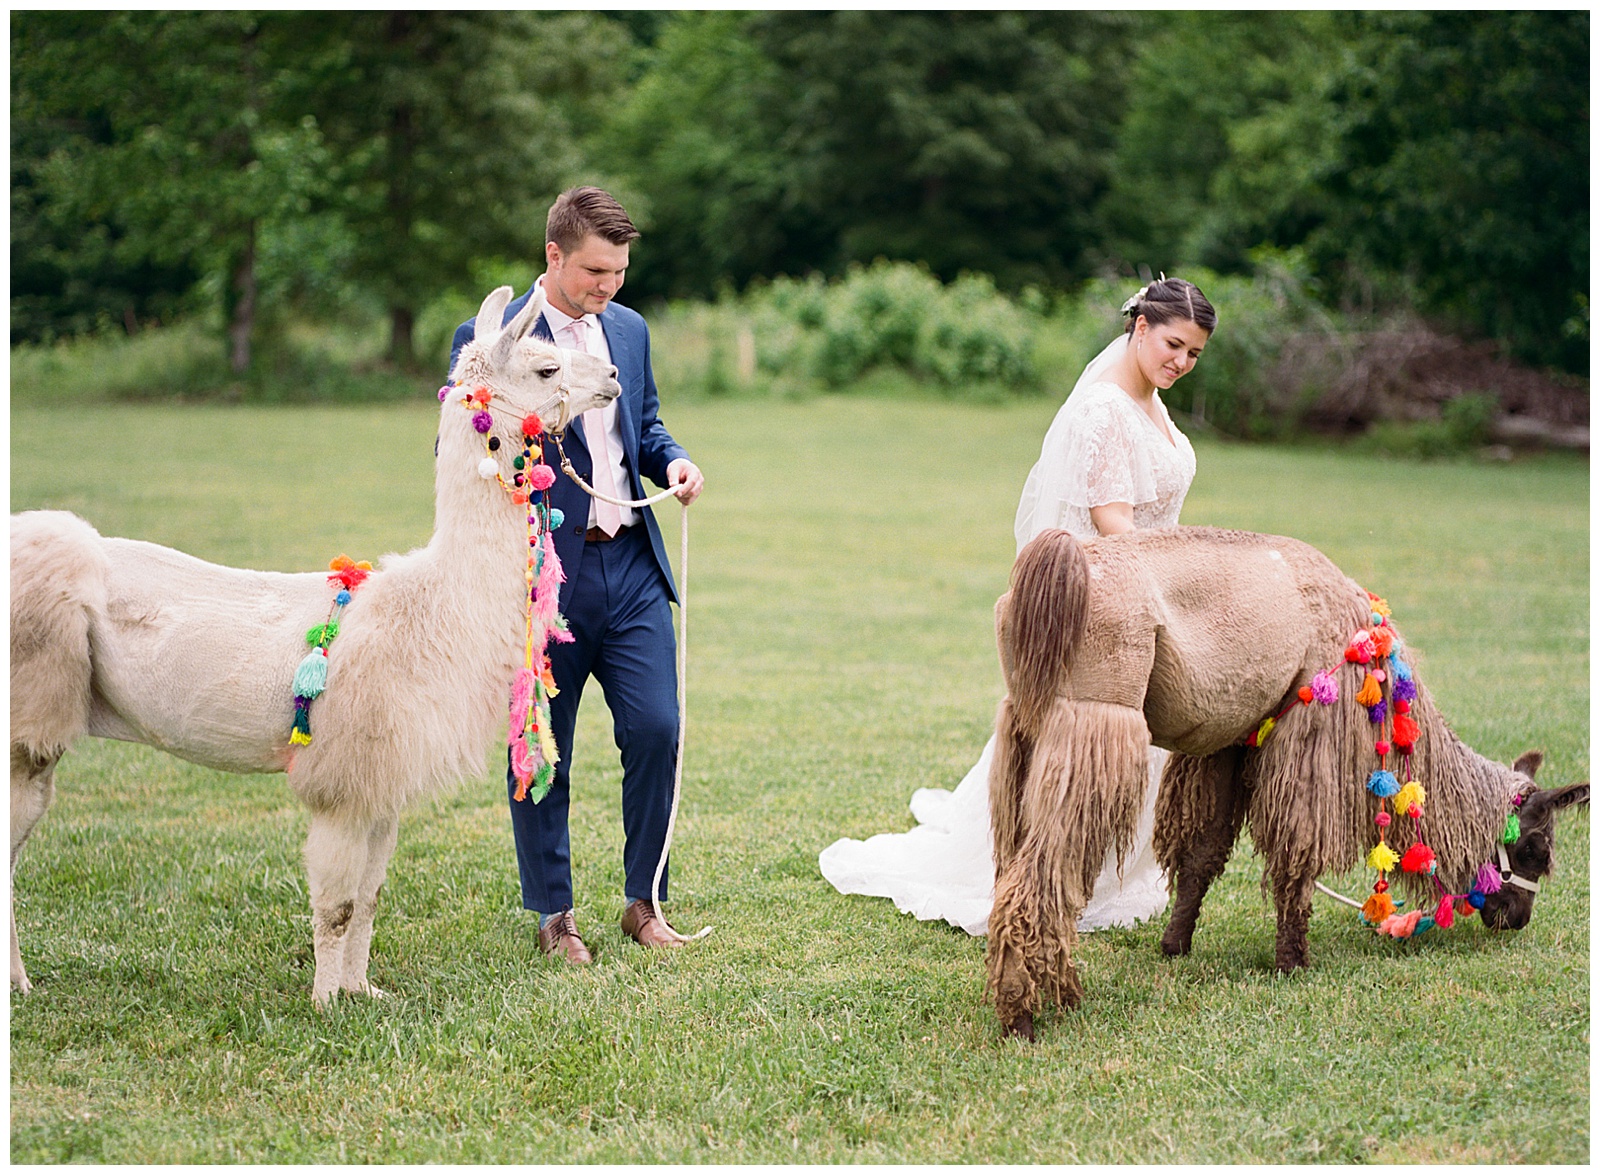 Llamas at a small outdoor wedding in East Tennessee Greenville in the mountains. Bride and groom walking with llamas. 